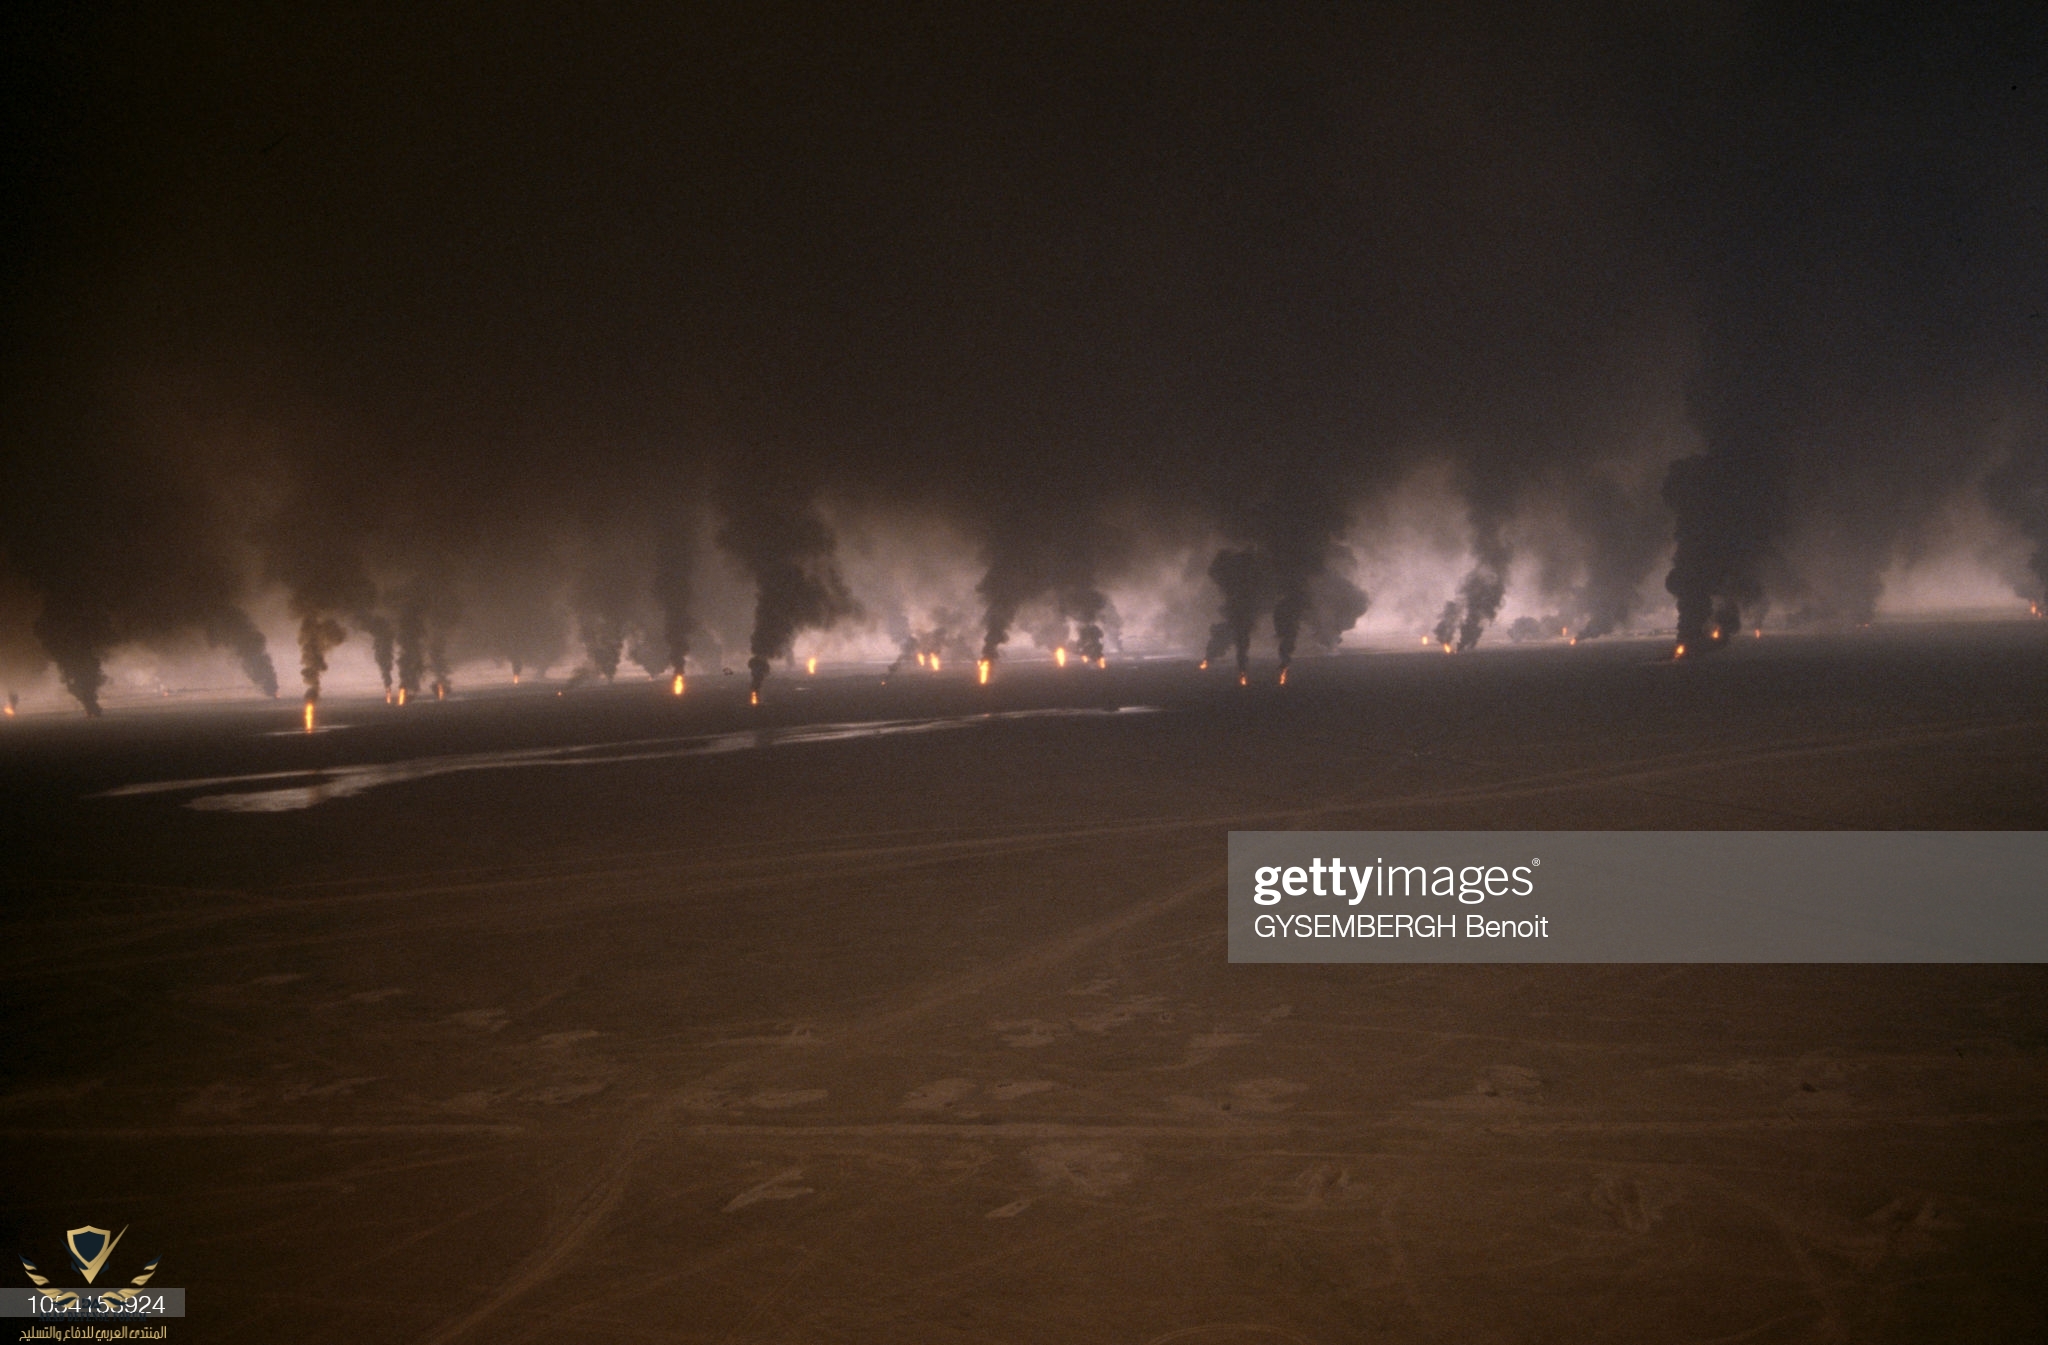 gettyimages-1054153924-2048x2048.jpg